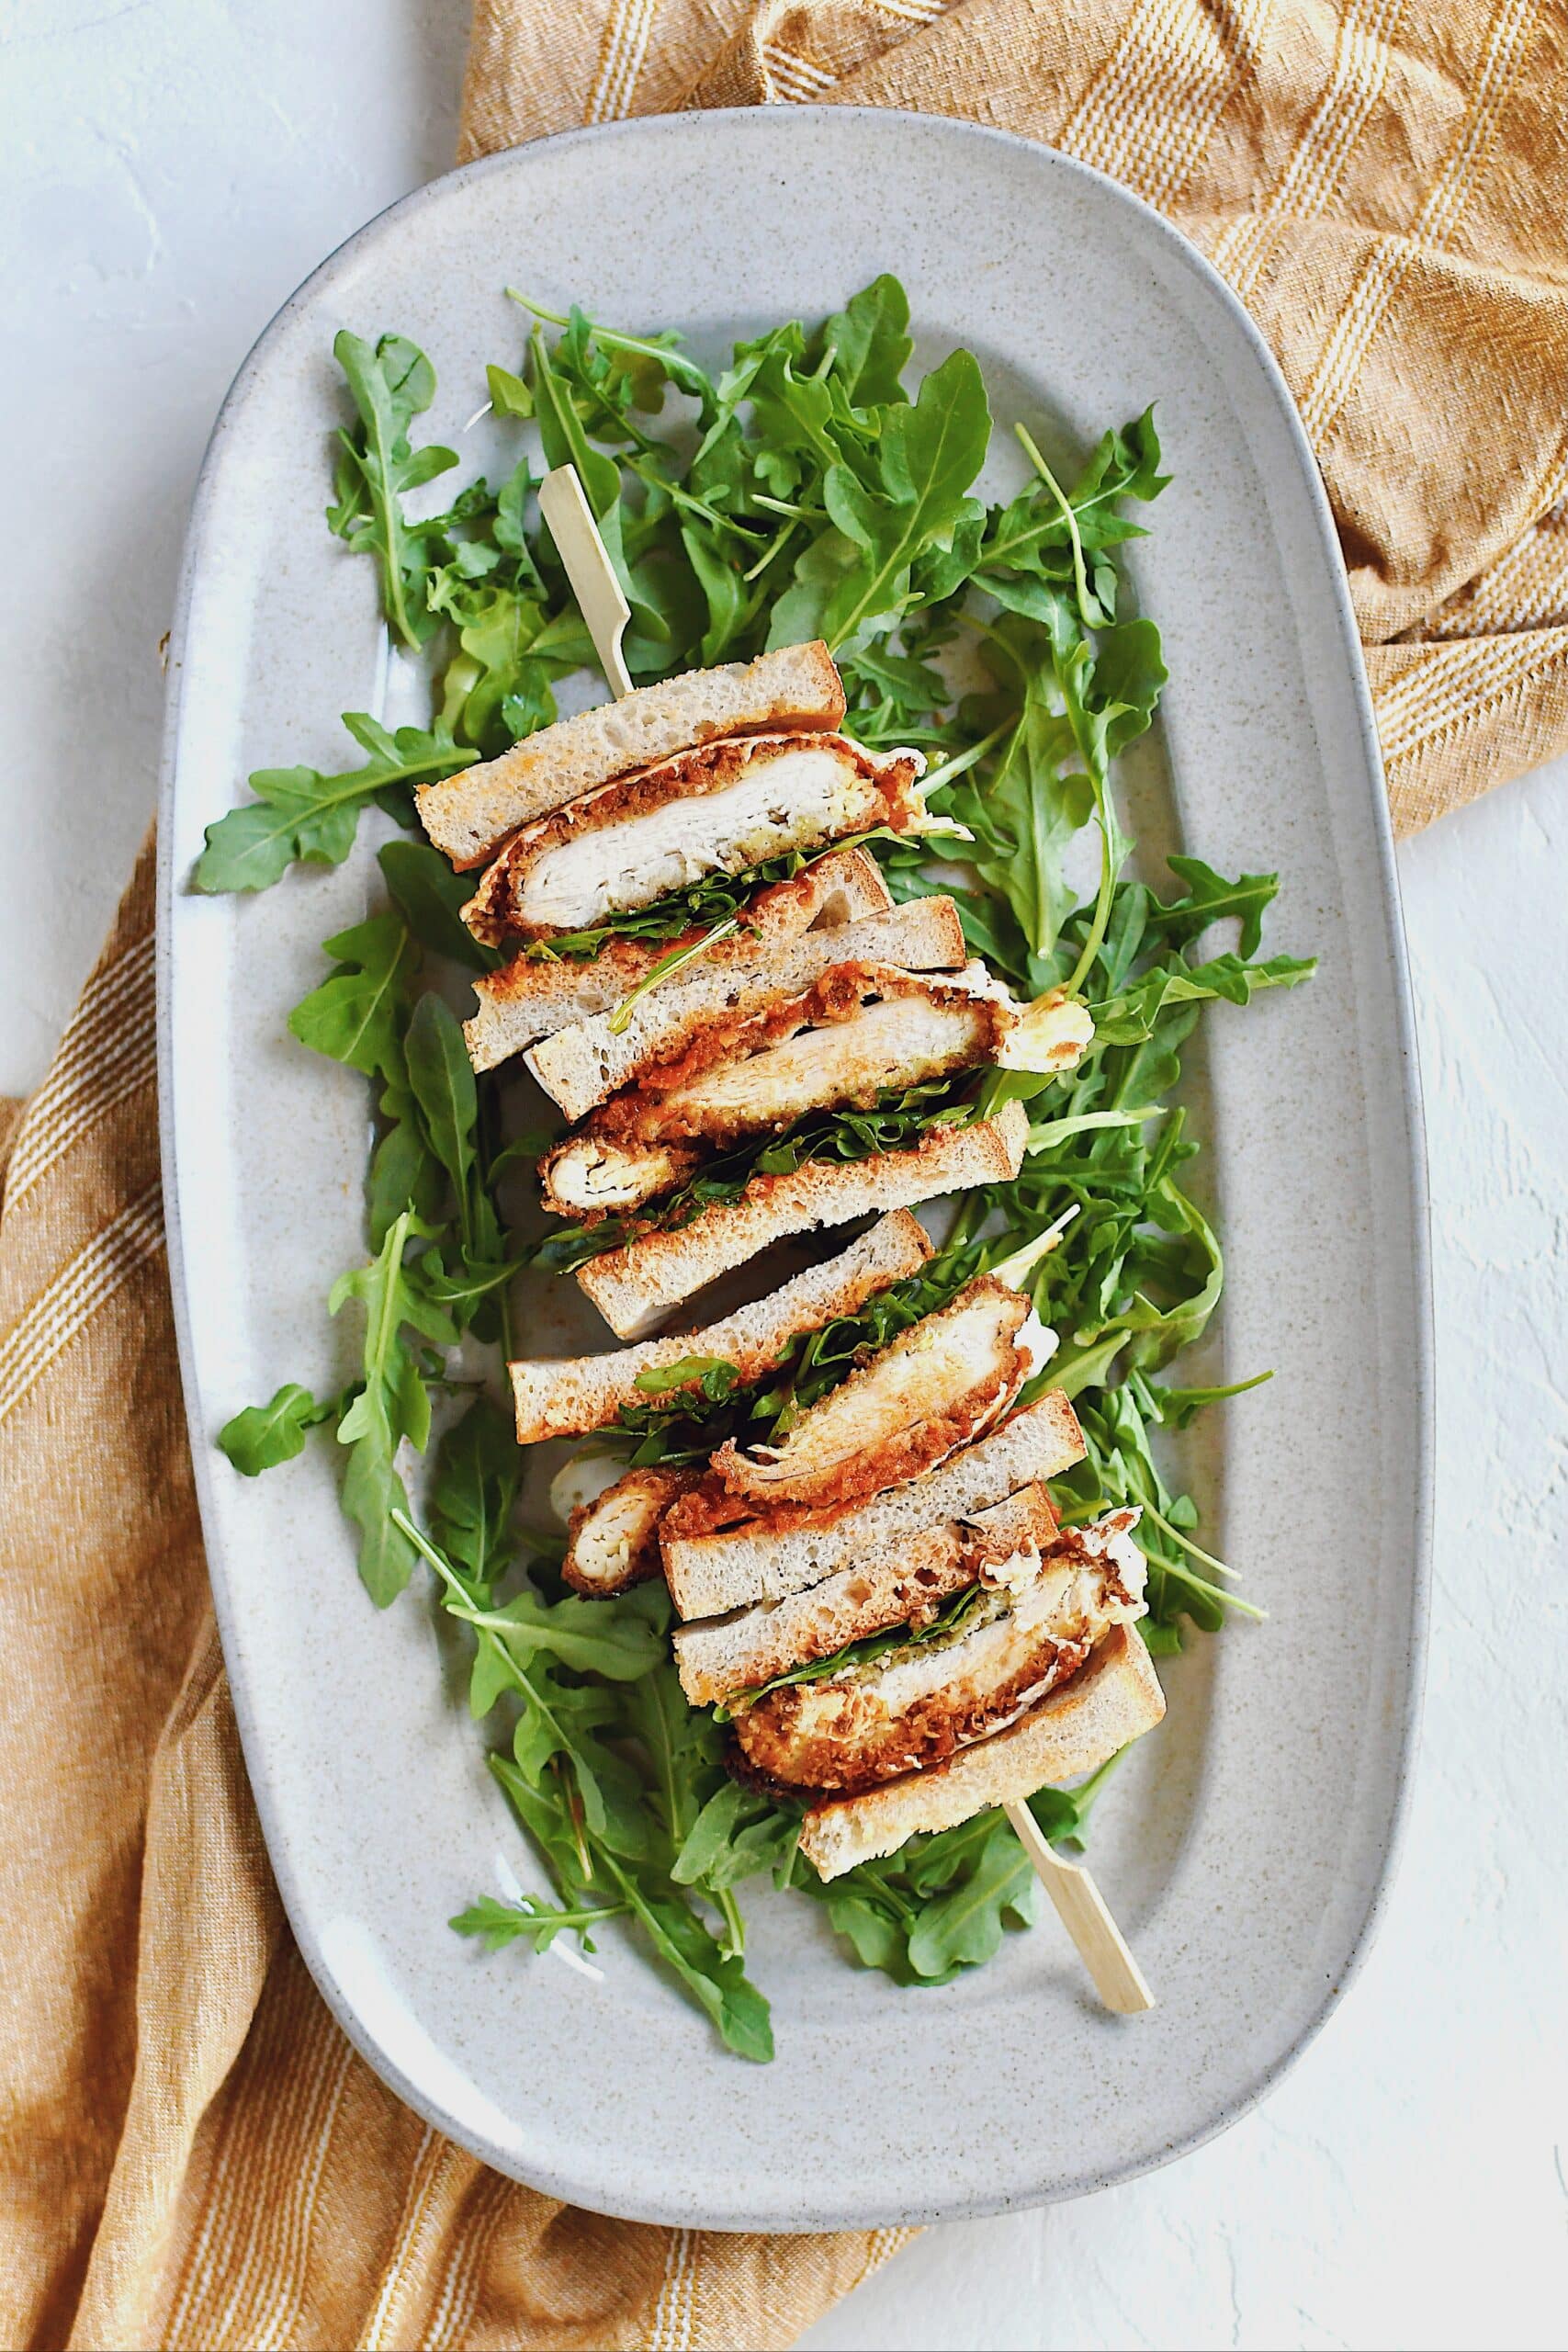 Parmesan Chicken Sandwich, sliced and stacked, laid on a platter on a bed of arugula.